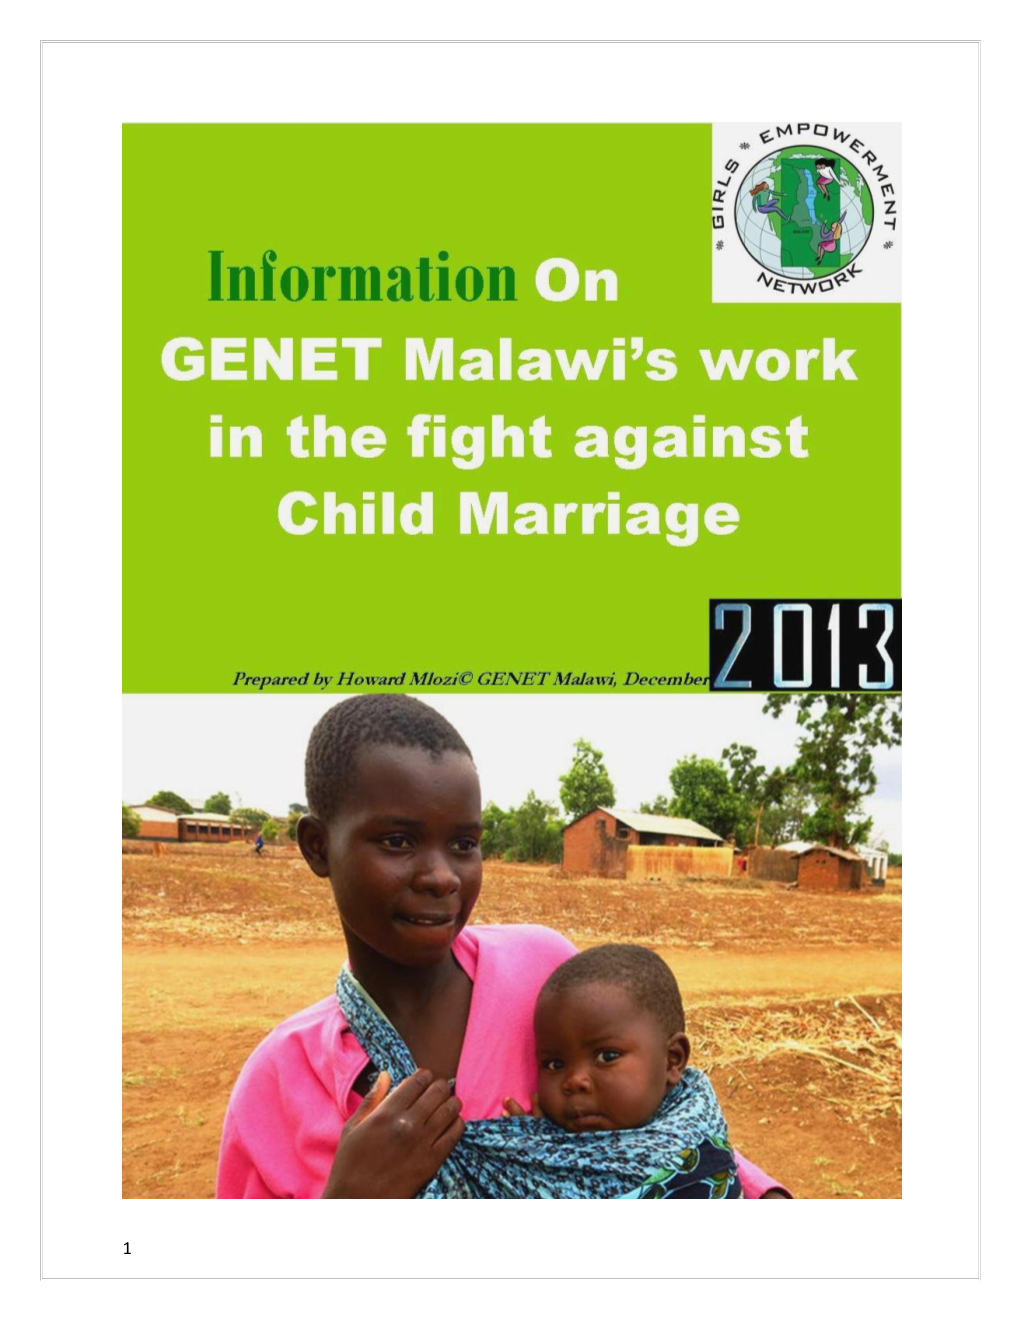 Girls Empowerment Network (GENET) Malawi Is a Local NGO Which Seeks to Advance Rights